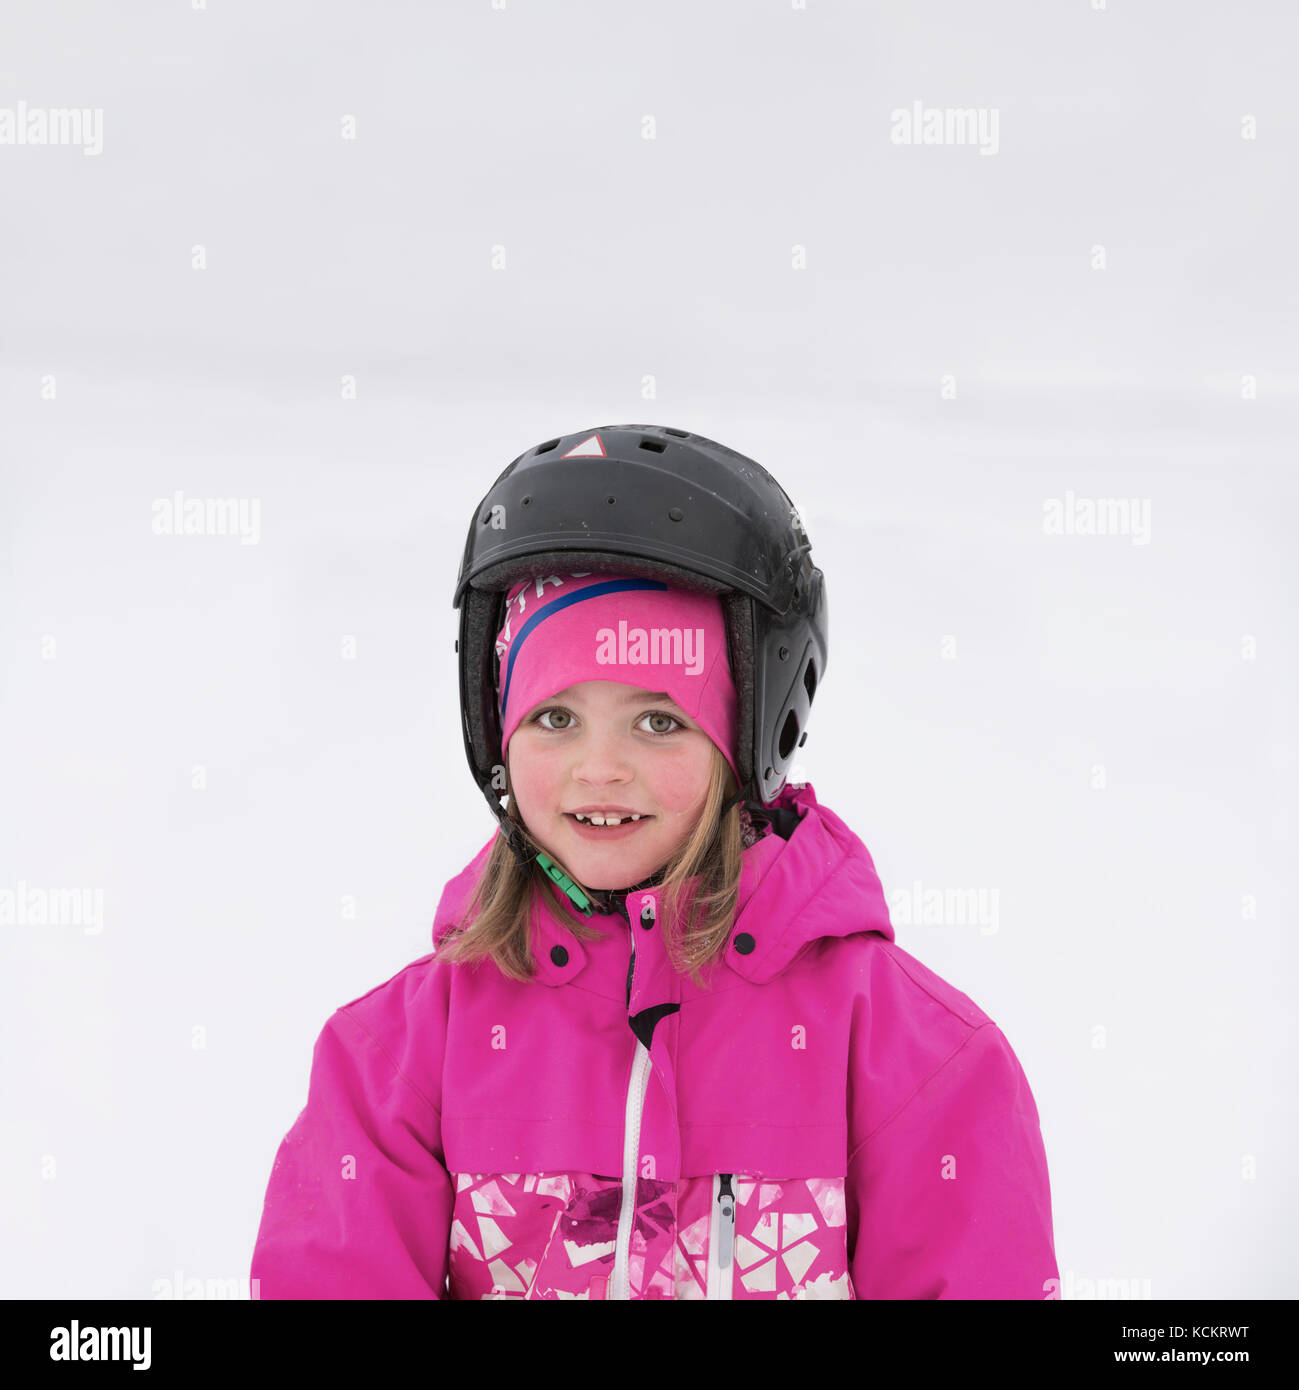 Eye contact portrait of young smiling girl with helmet in the snow outdoors Stock Photo